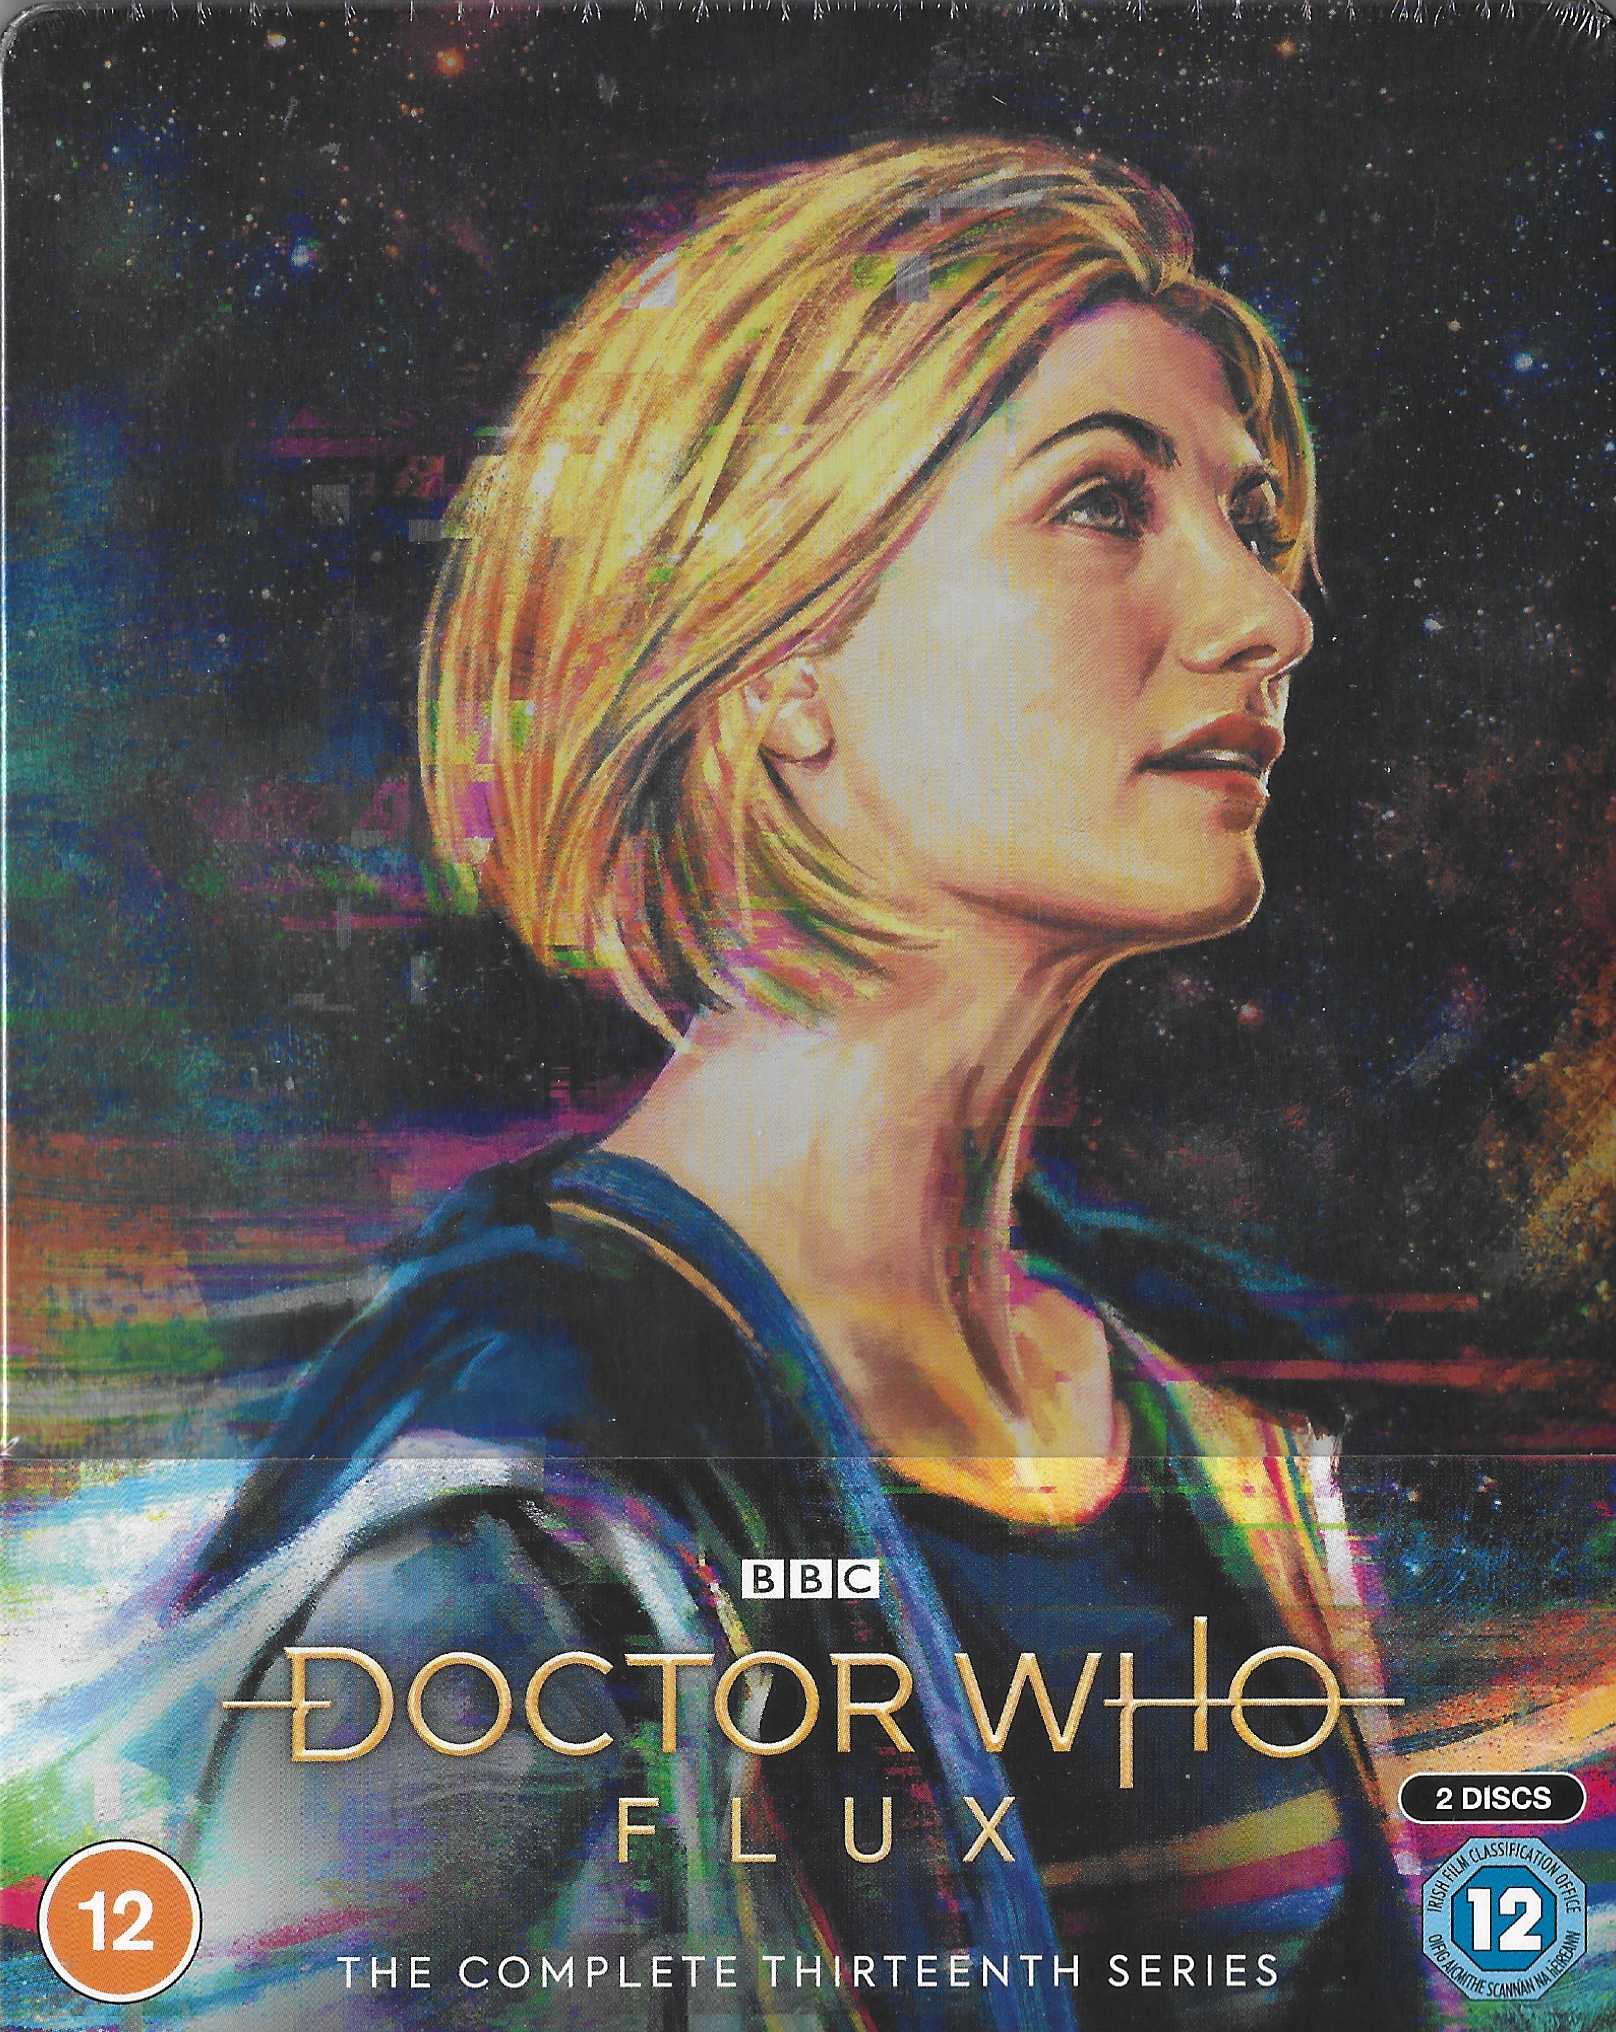 Picture of BBCBD 0554 Doctor Who - Flux by artist Various from the BBC blu-rays - Records and Tapes library